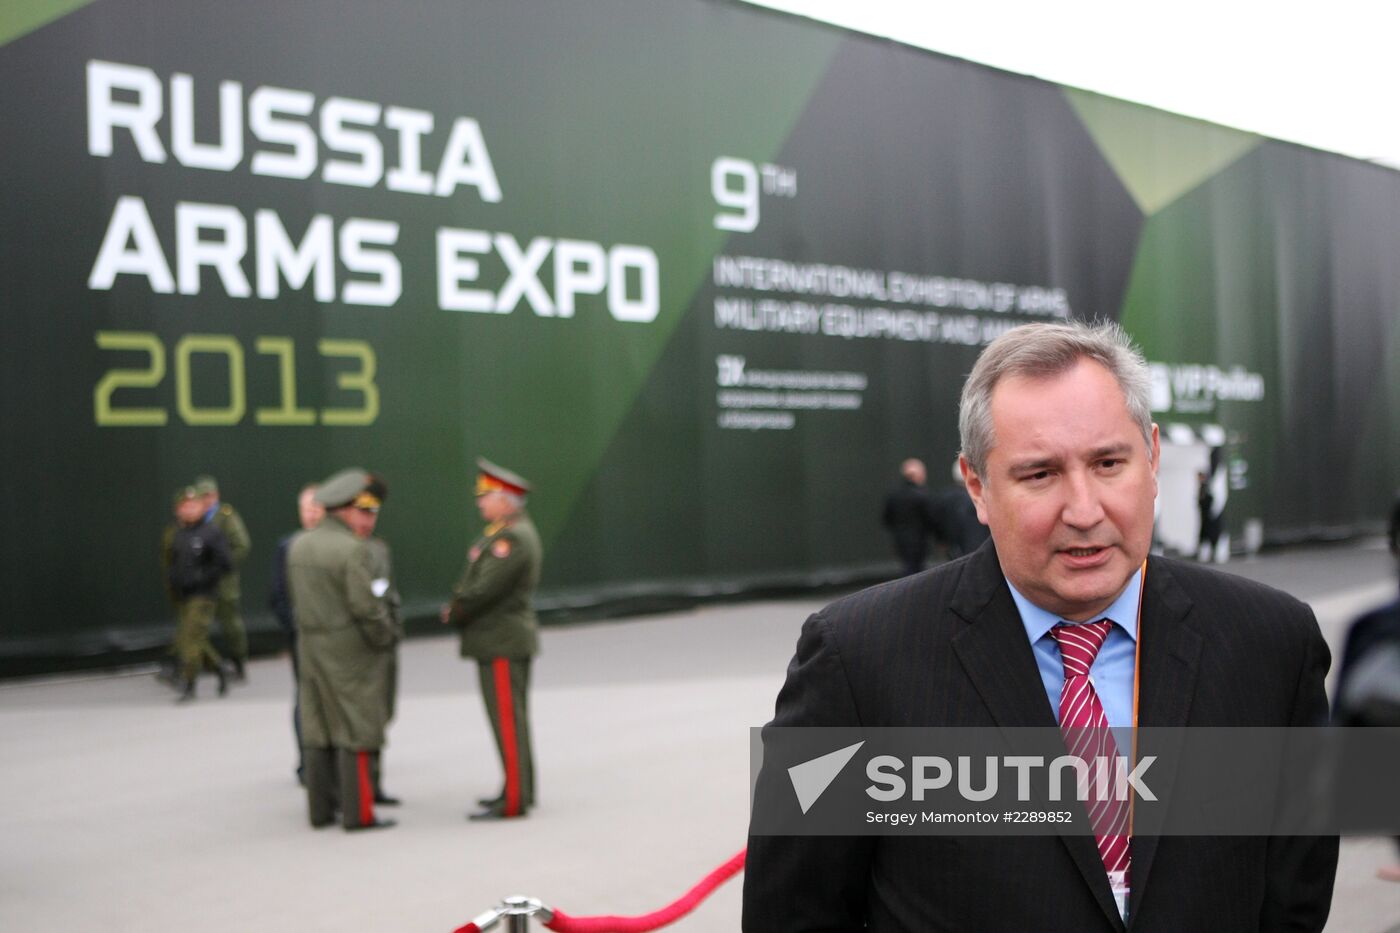 Russian Expo Arms 2013